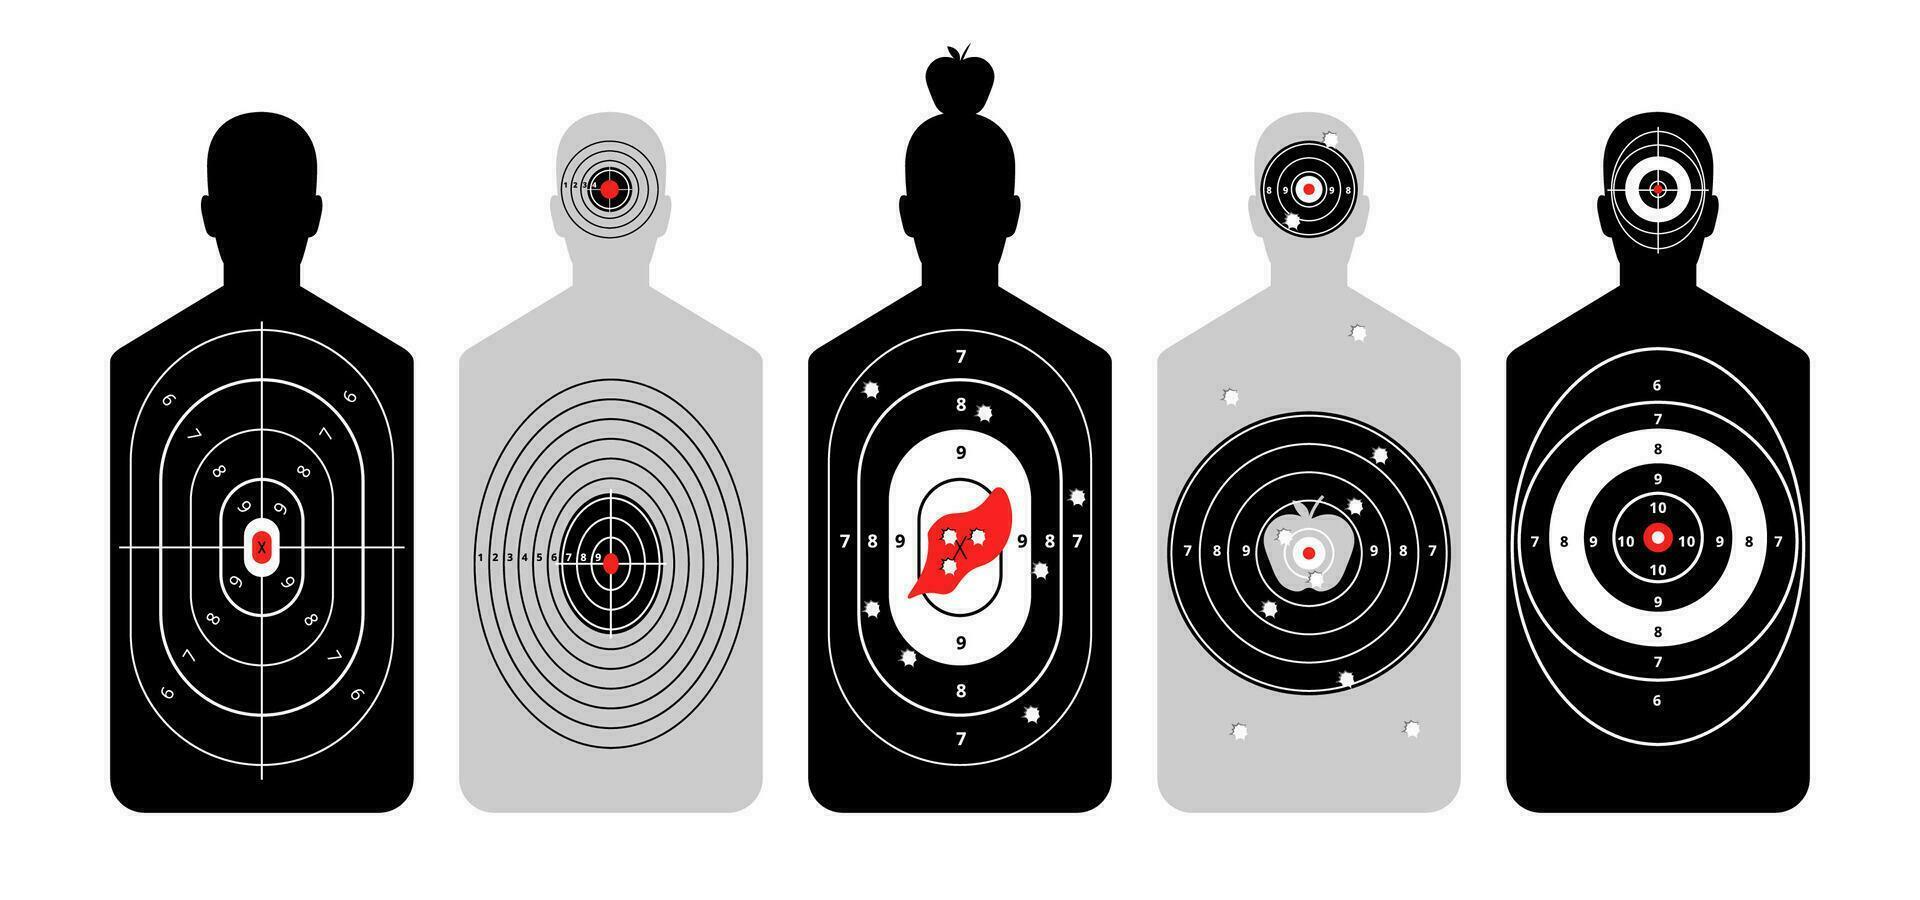 Targets for shooting with human silhouette. Training figure with outlined circles and numbers of points for hitting training in shooting from firearms and vector bow.